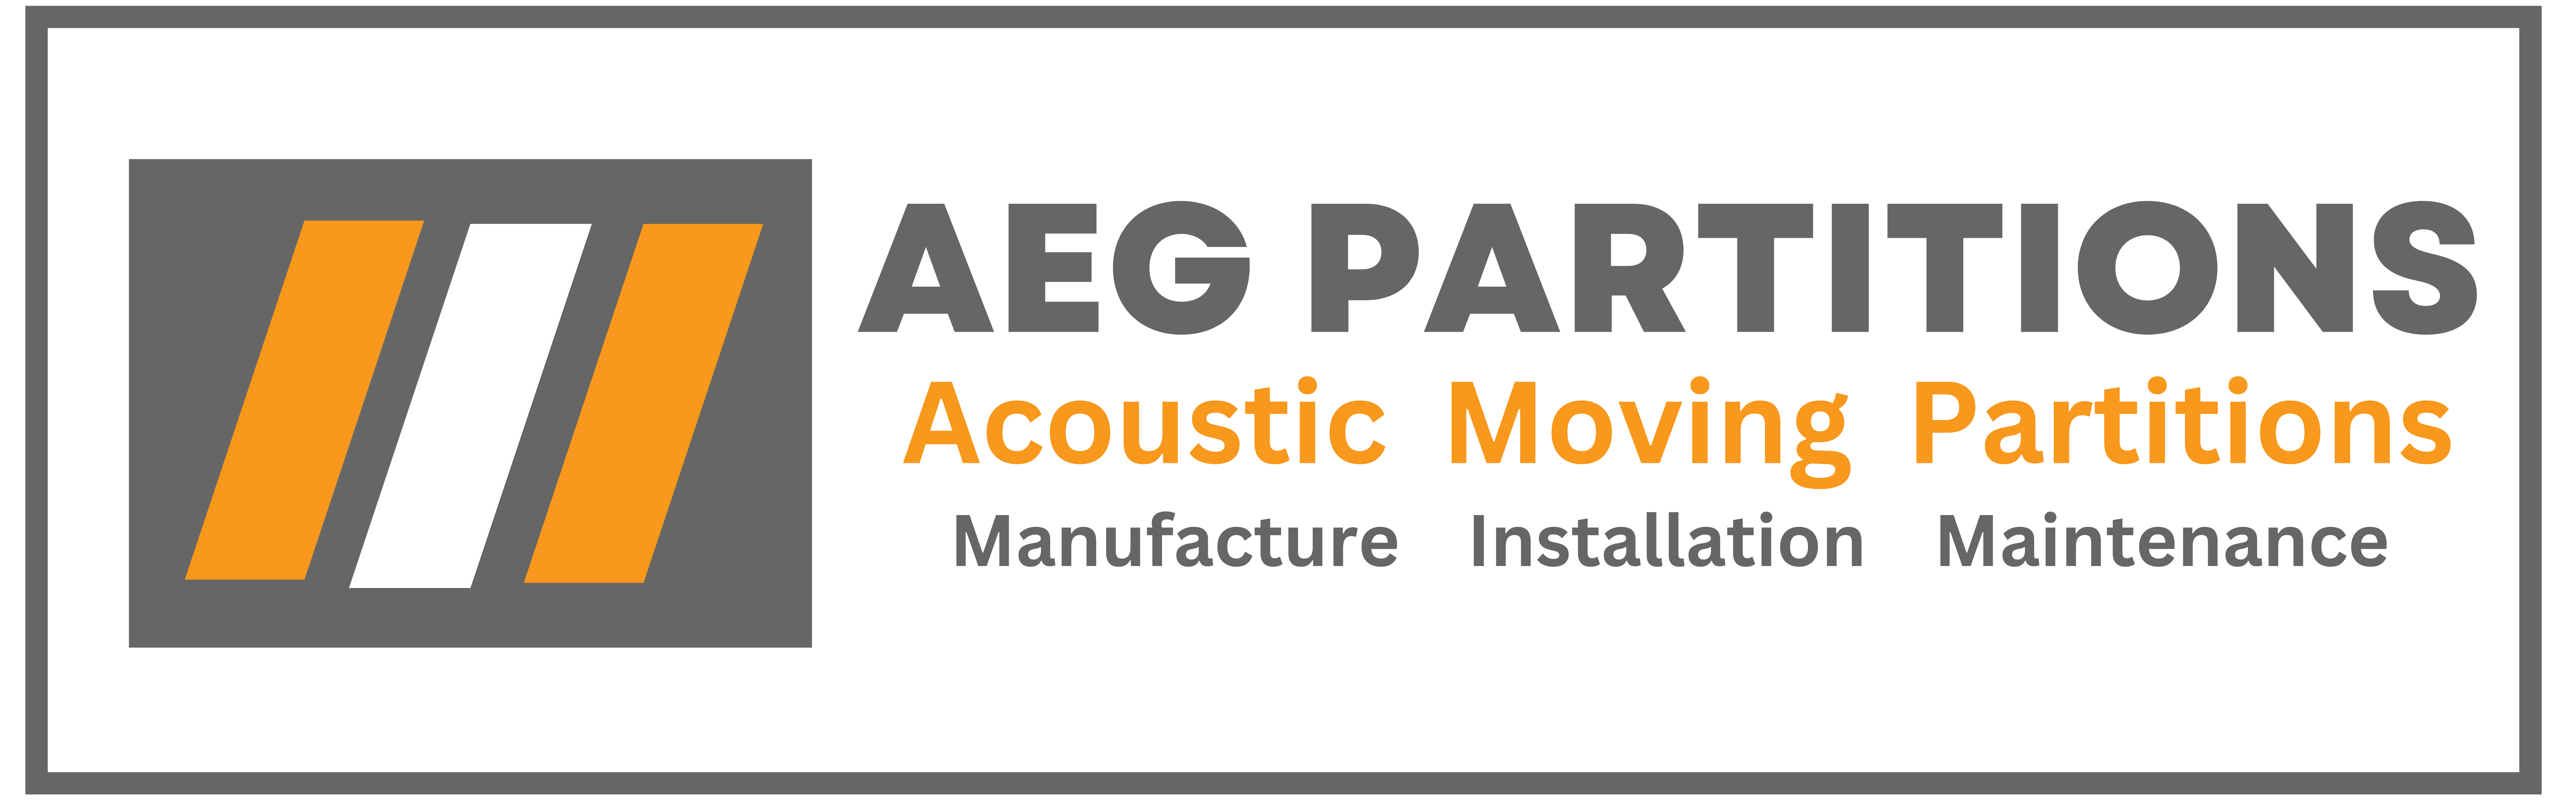 AEG Partitions